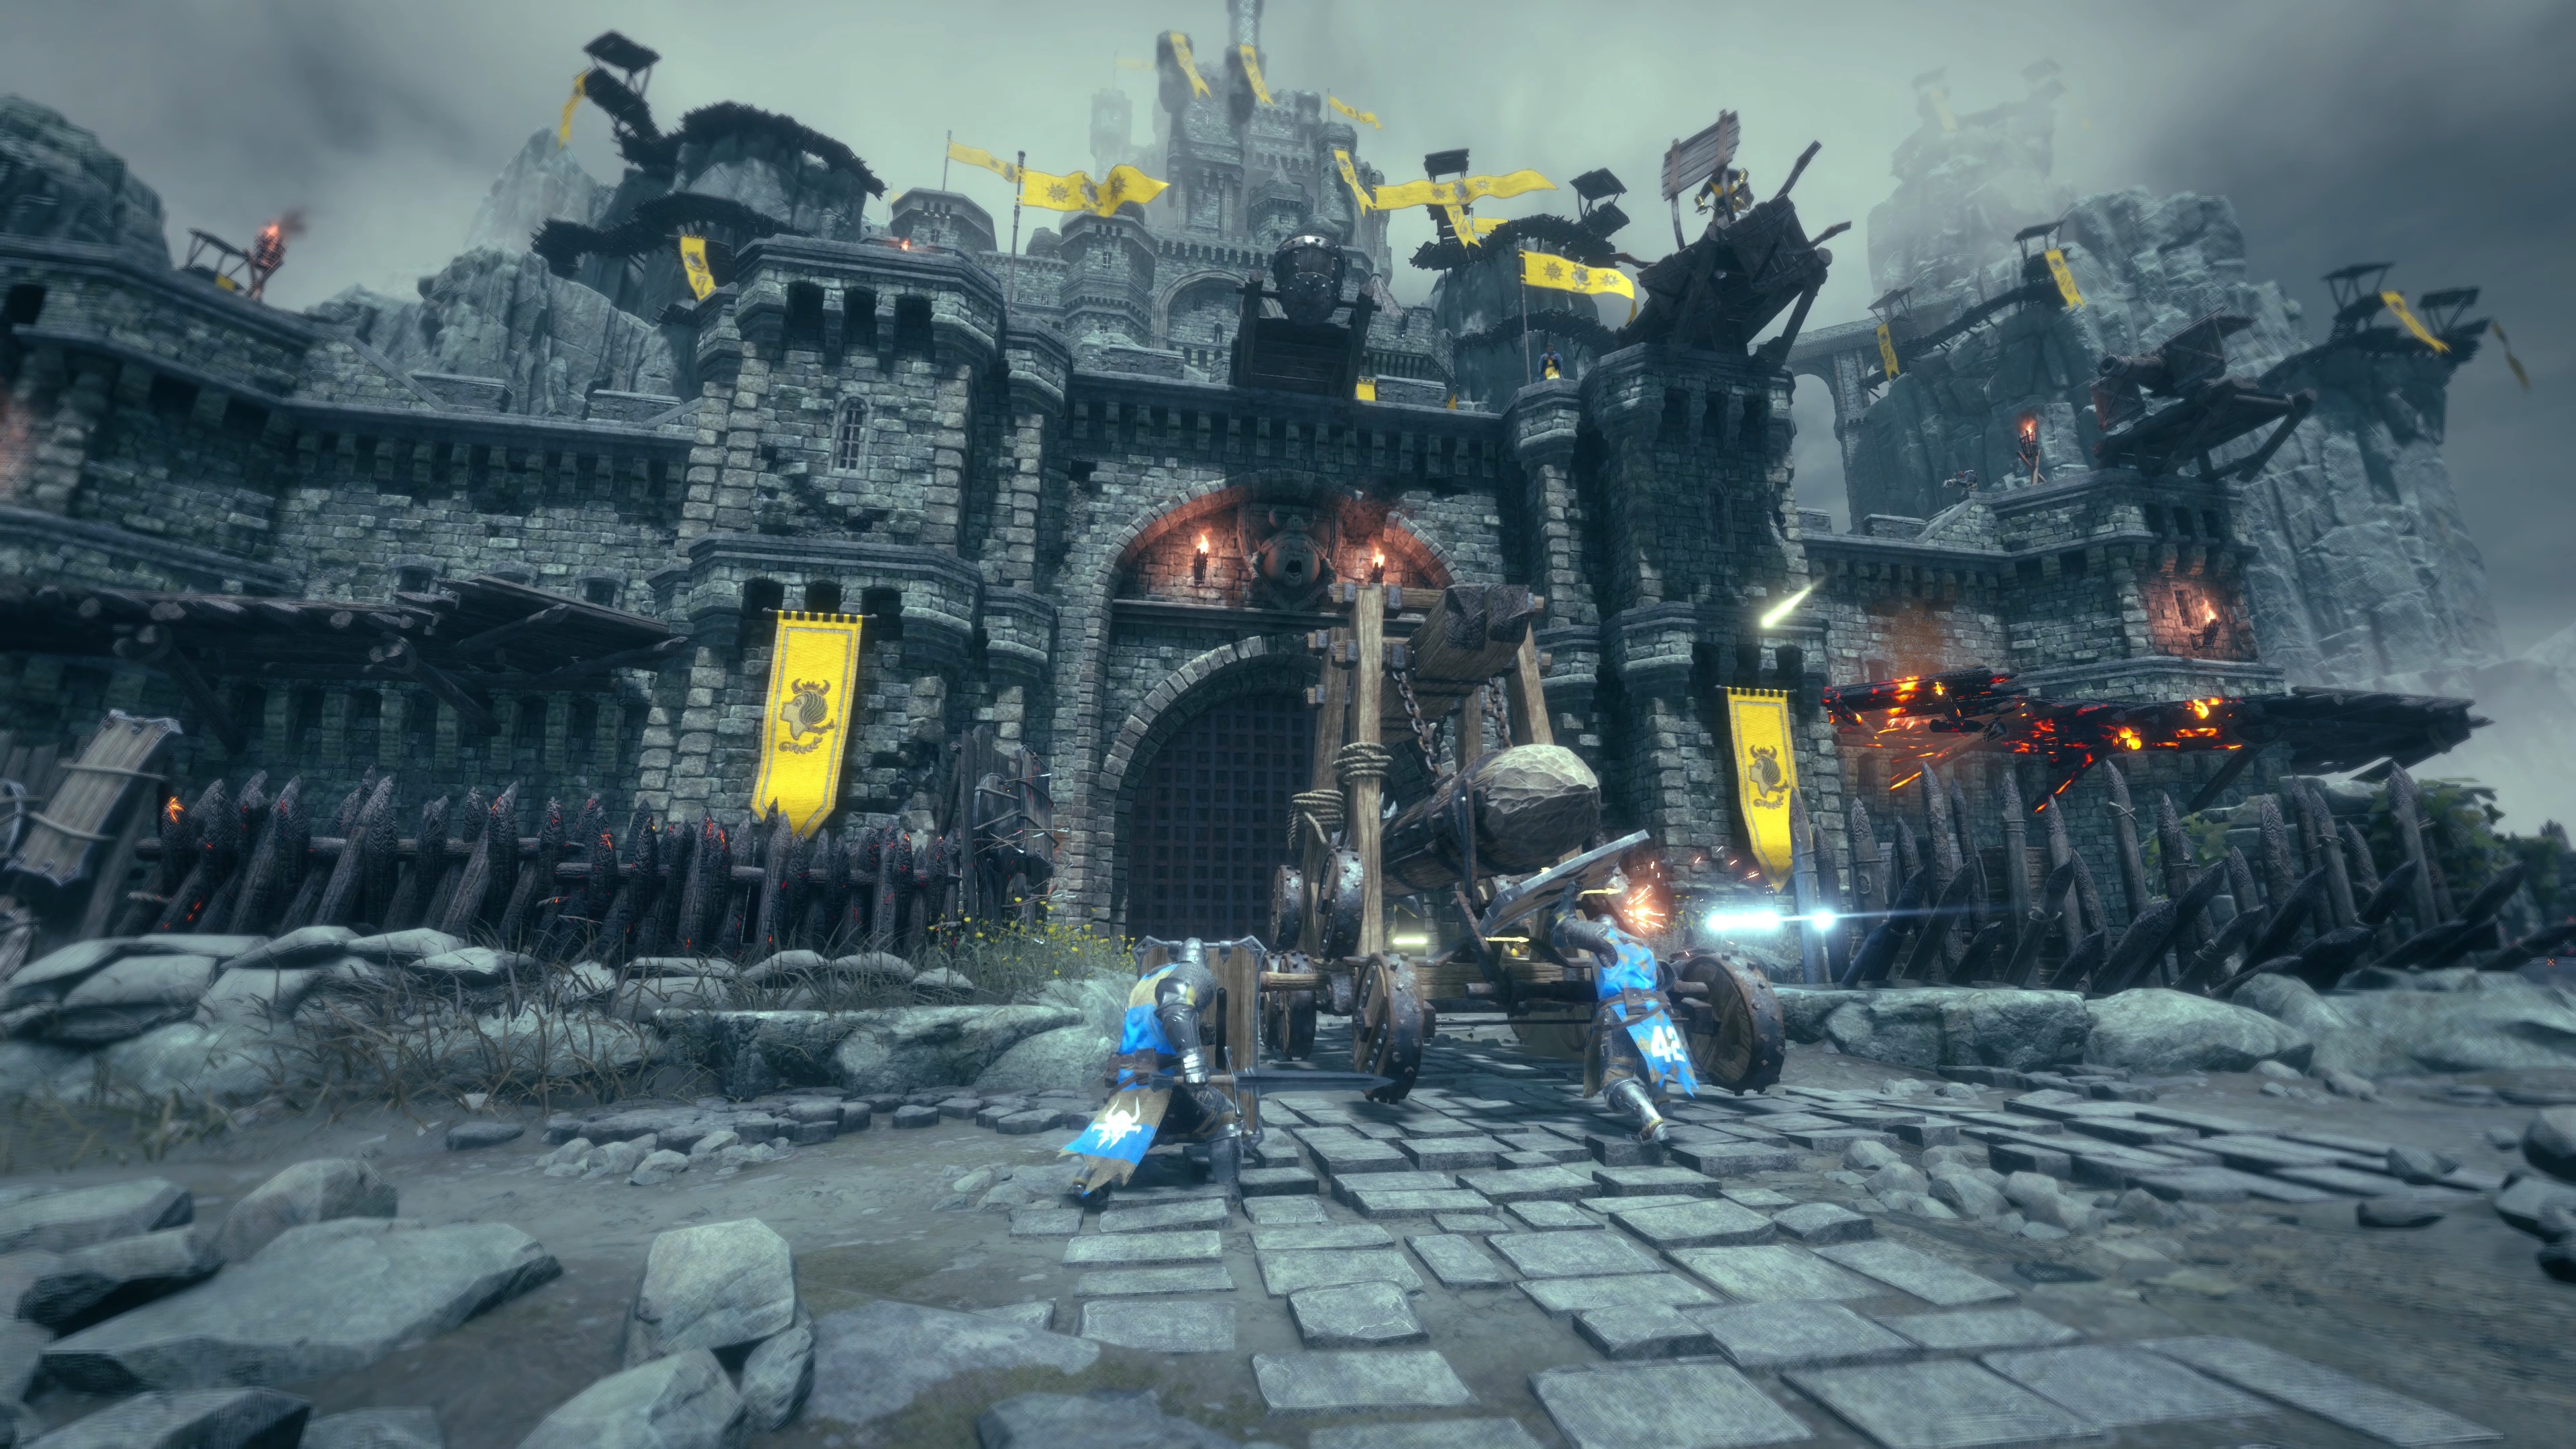 Free-to-play online multiplayer title Warlander hits Steam -   News